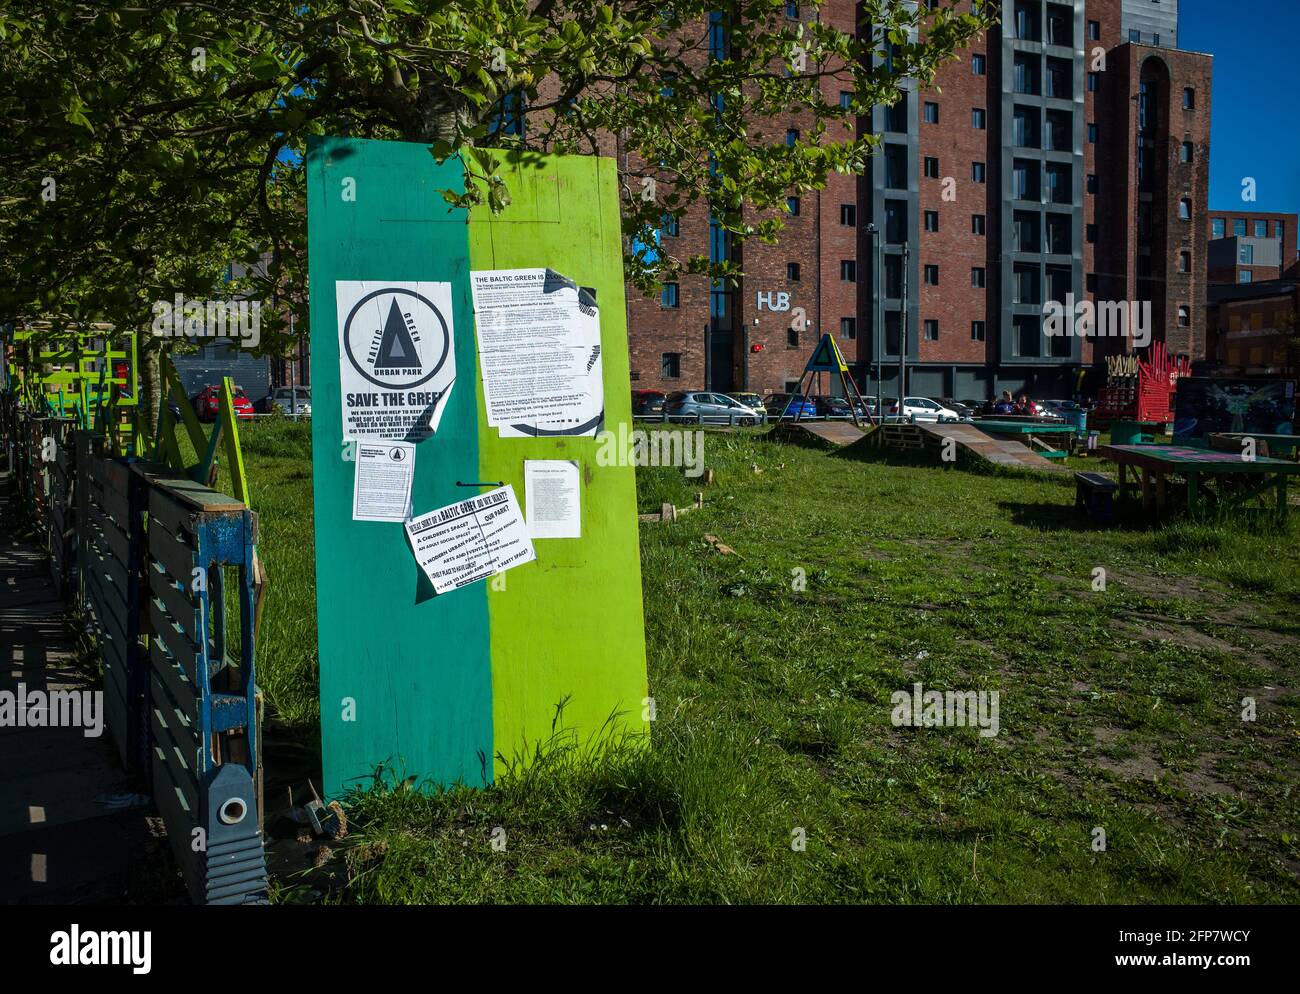 Liverpool May 19th  2021. Sign asking for ideas on what type of use  people want for the Baltic Green, a public space under thret in Liverpool, the Ba Stock Photo